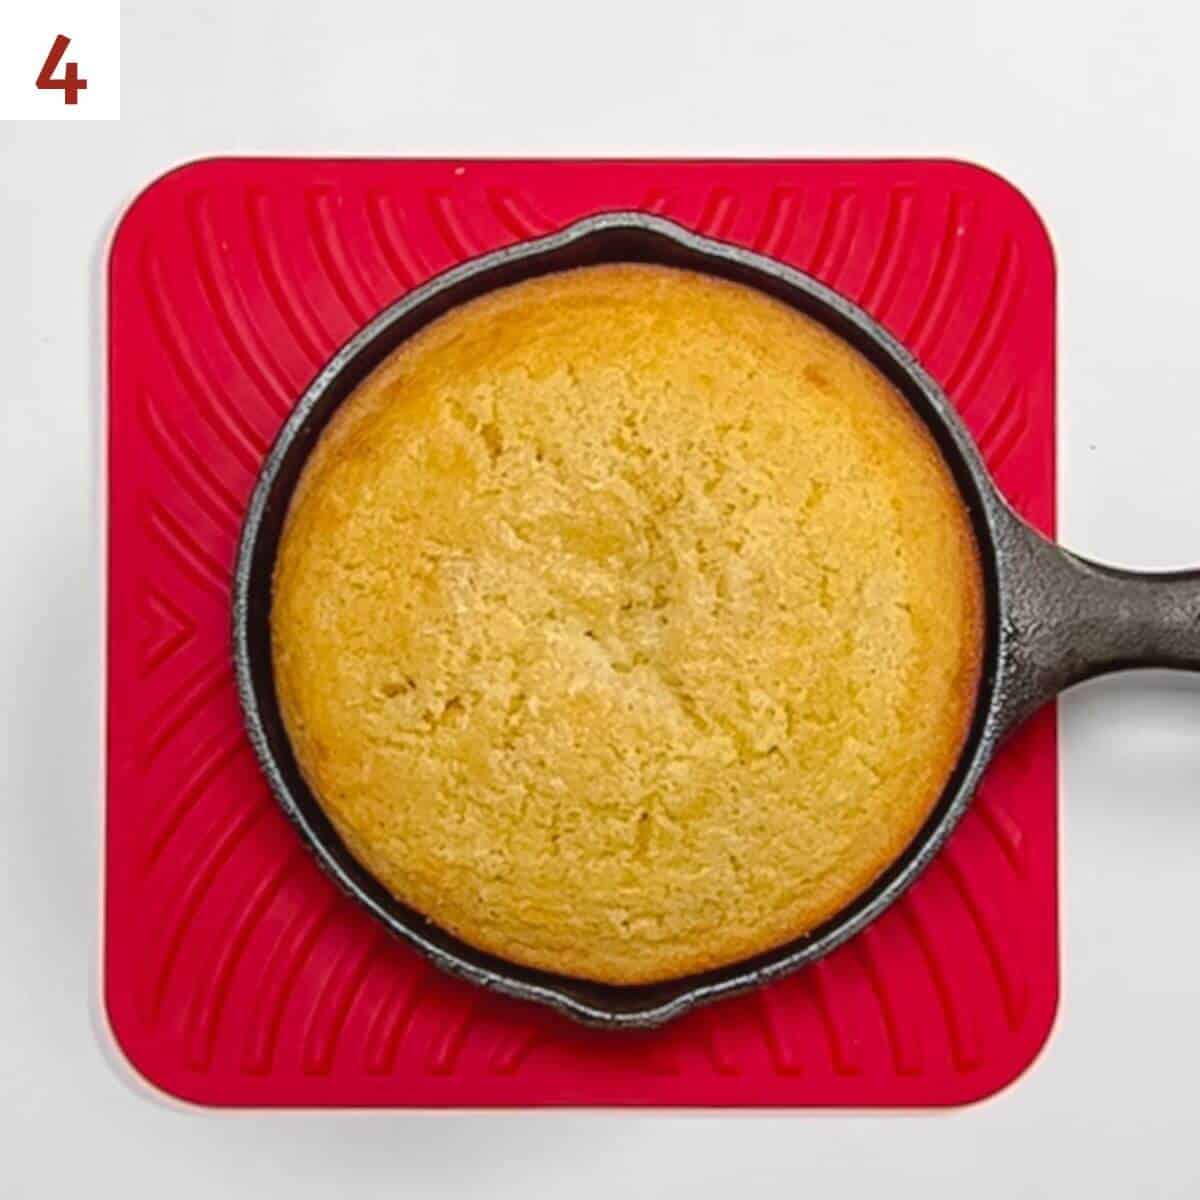 Baked cornbread in a cast iron skillet on a red trivet from overhead.